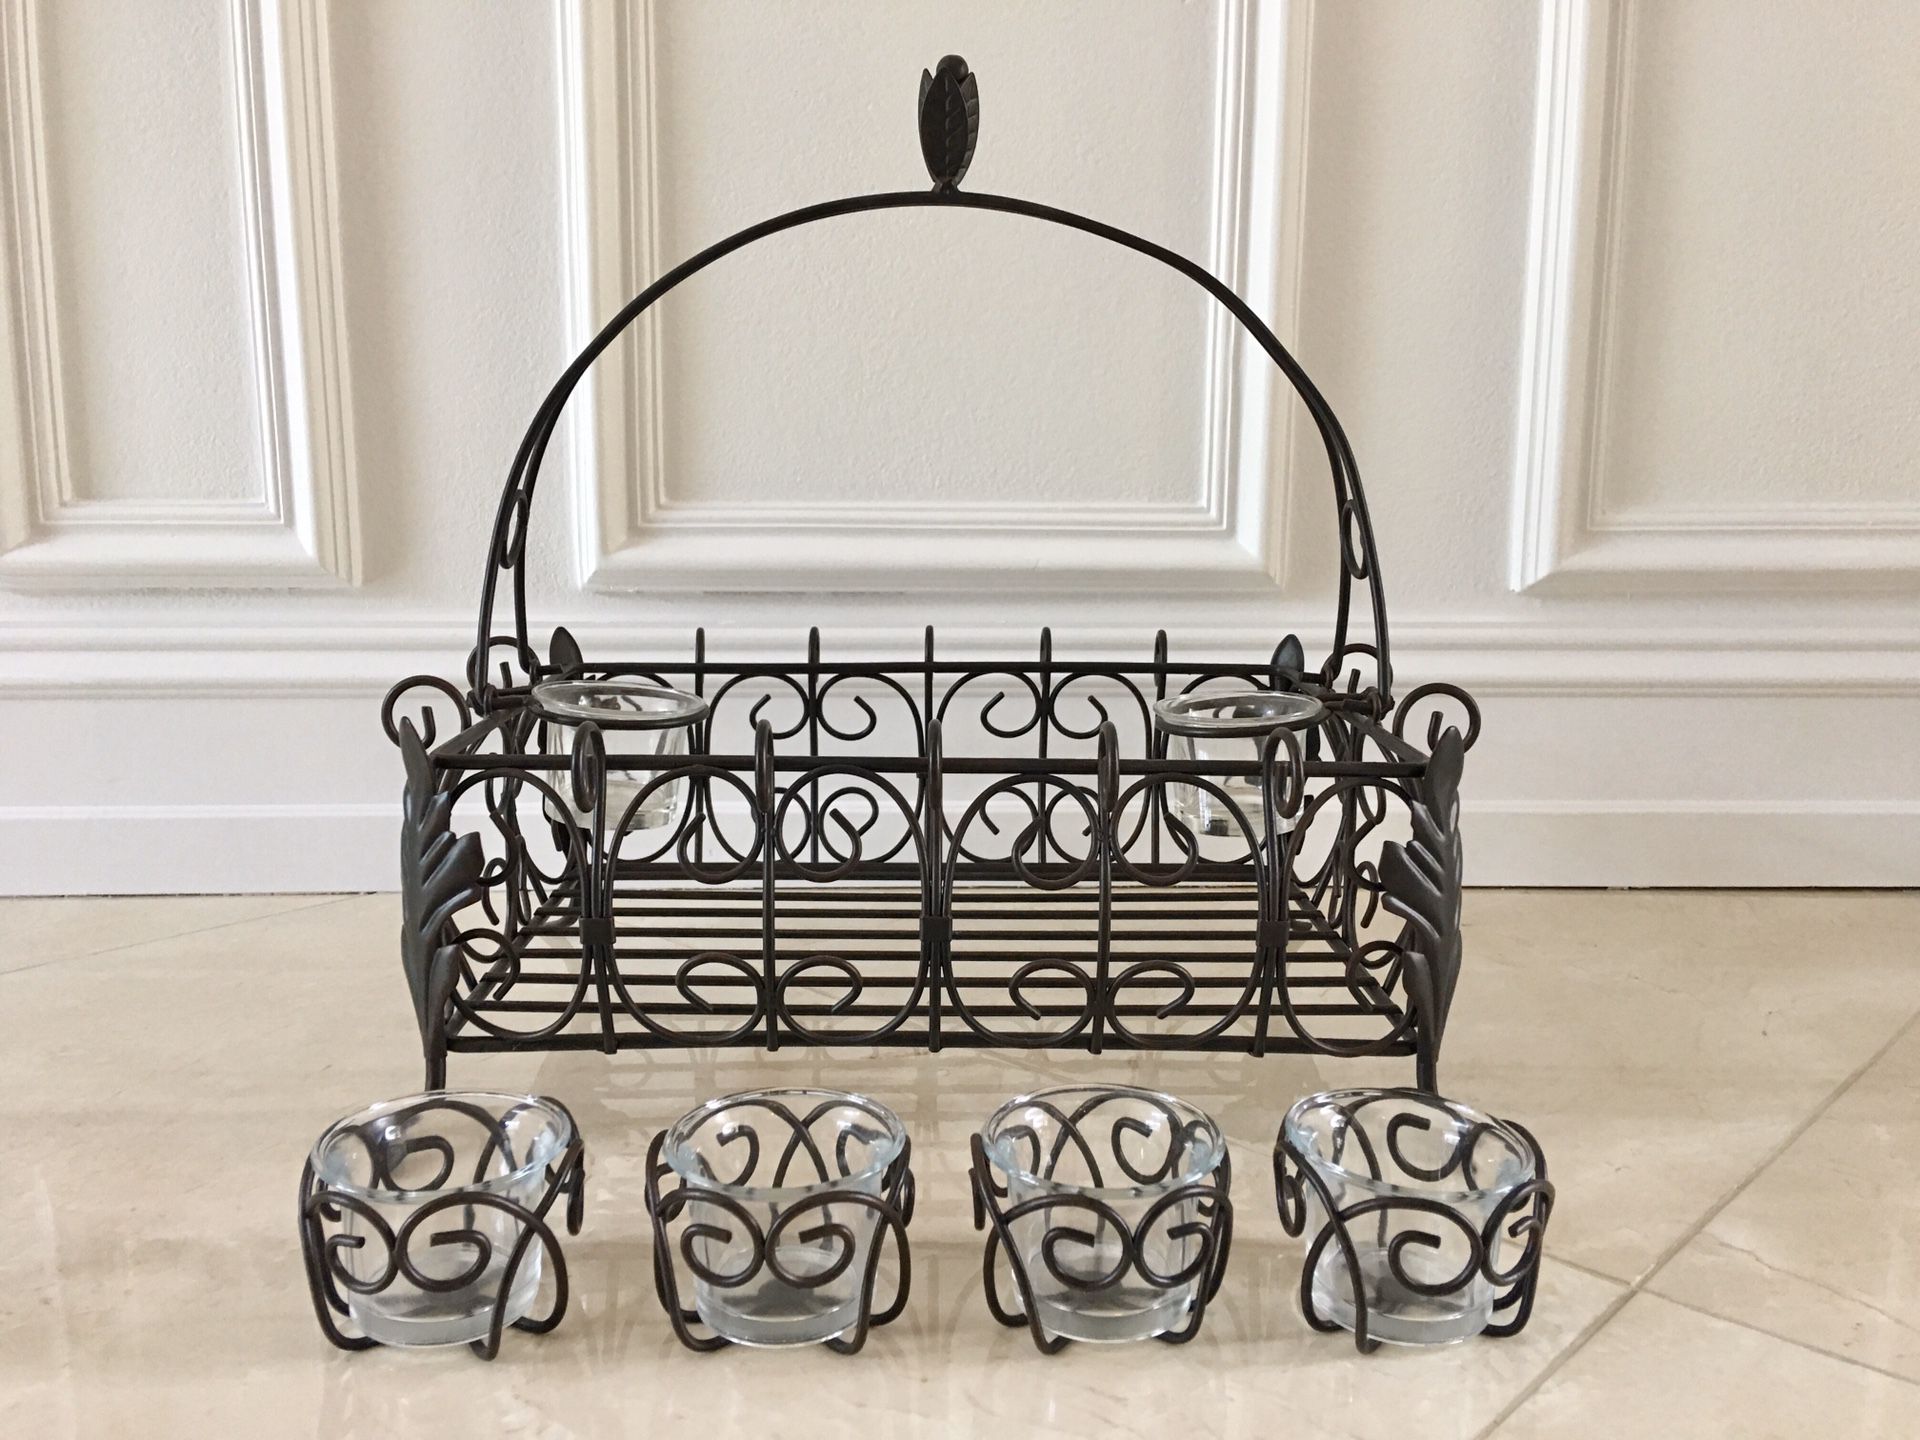 Serving basket with matching 4 piece tea candle holder set